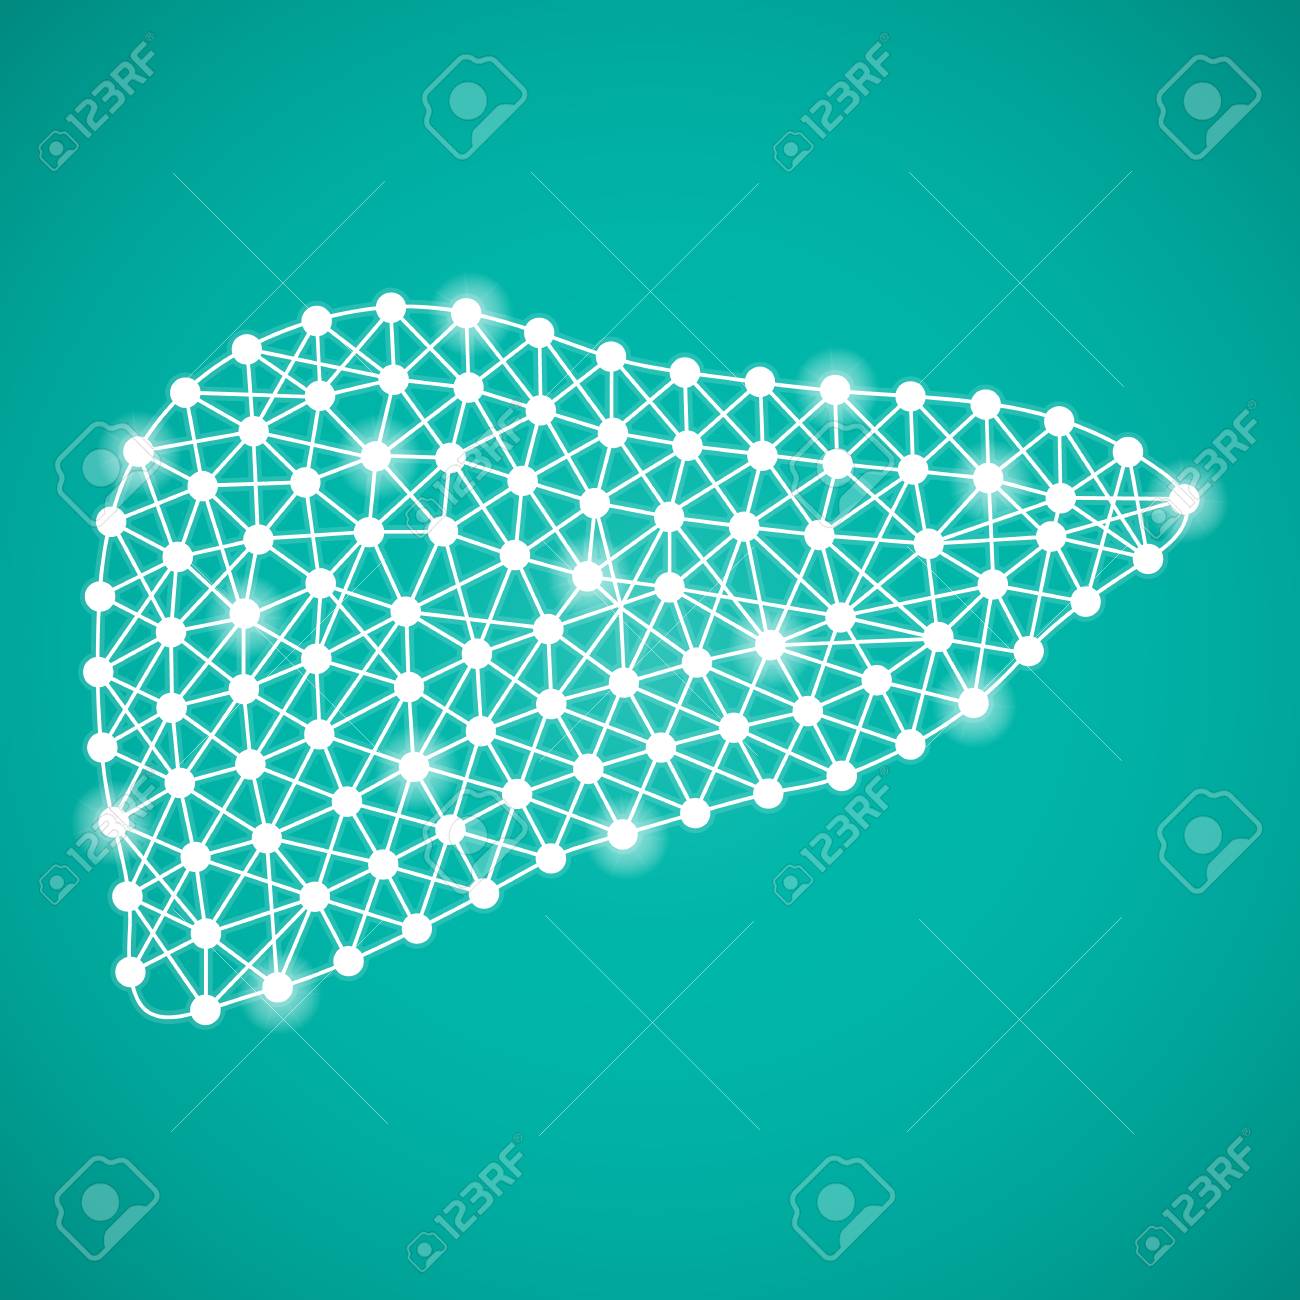 Human Liver Isolated On A Green Background Vector Illustration